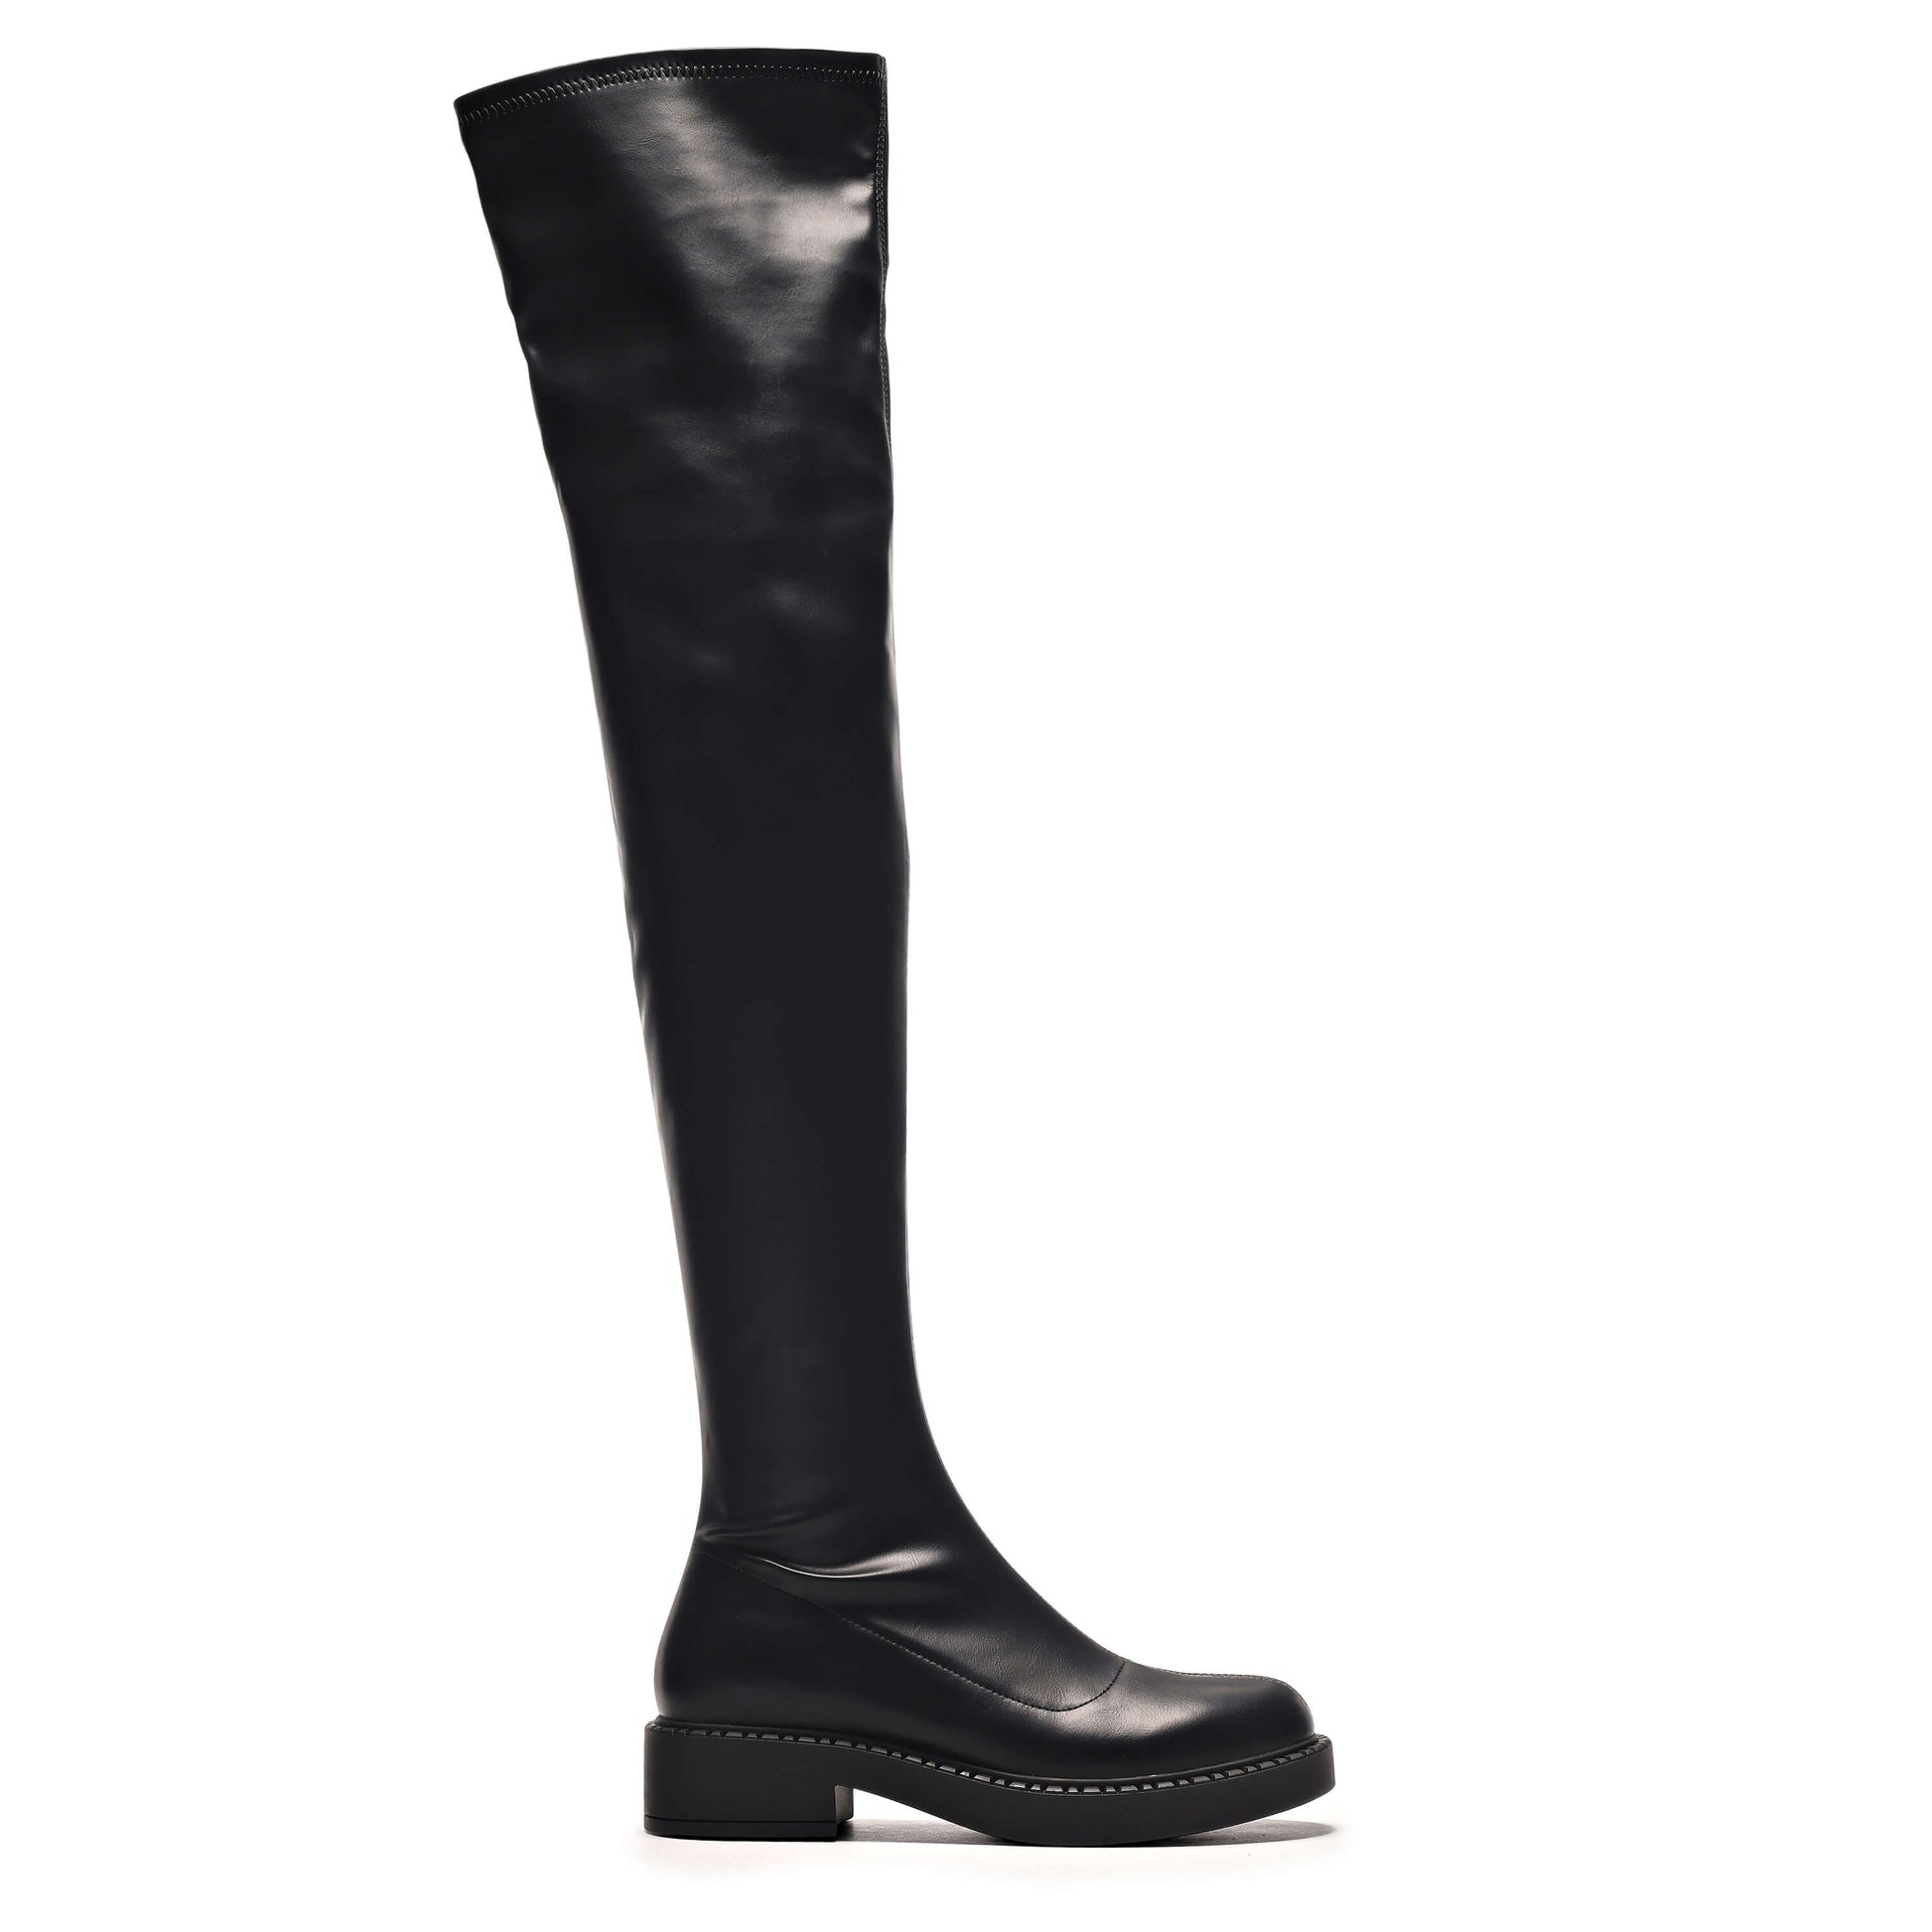 The Commander Plus Size Thigh High Boots - Long Boots - KOI Footwear - Black - Side View